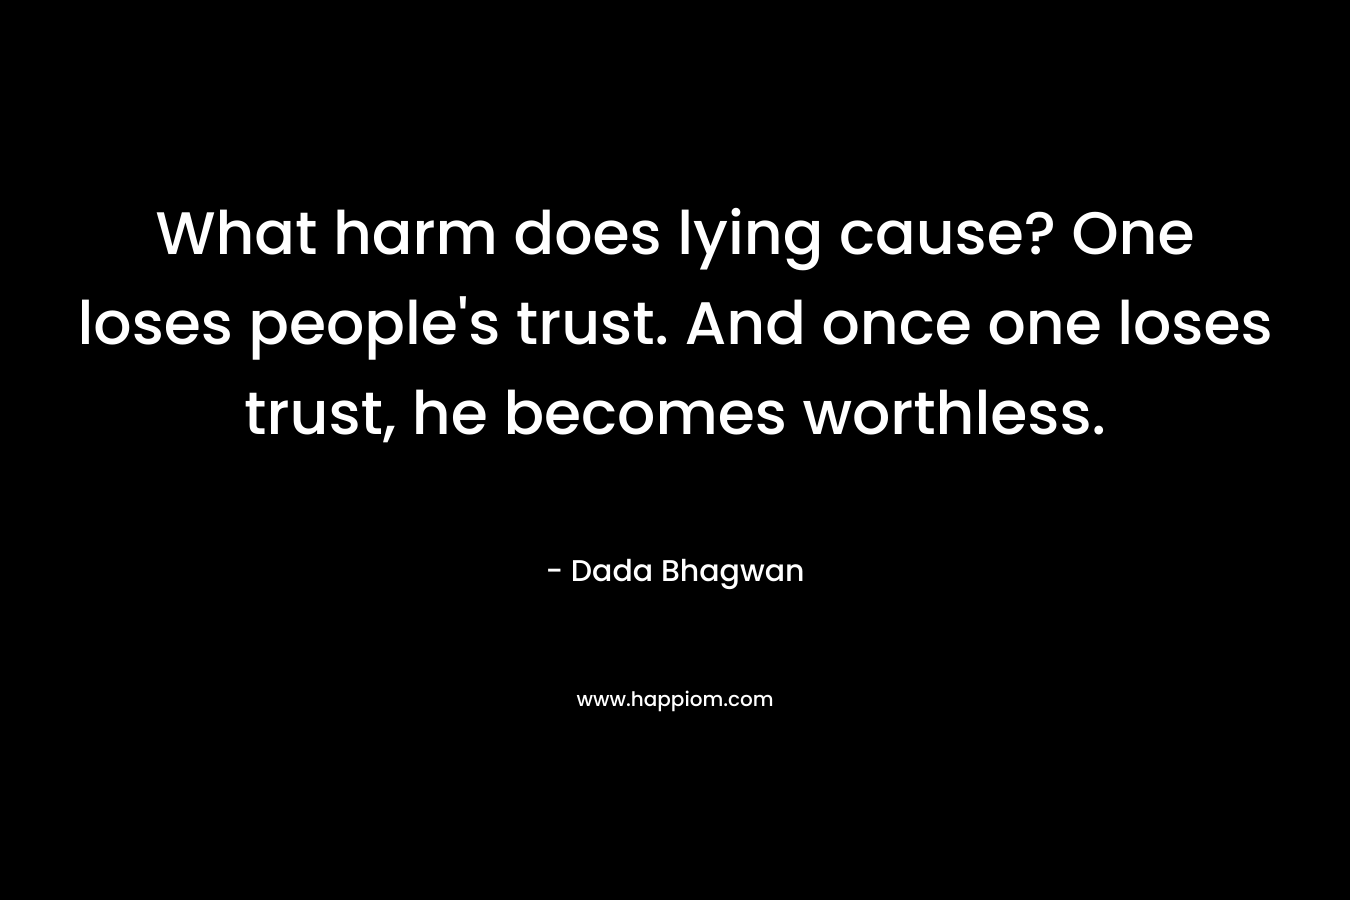 What harm does lying cause? One loses people's trust. And once one loses trust, he becomes worthless.